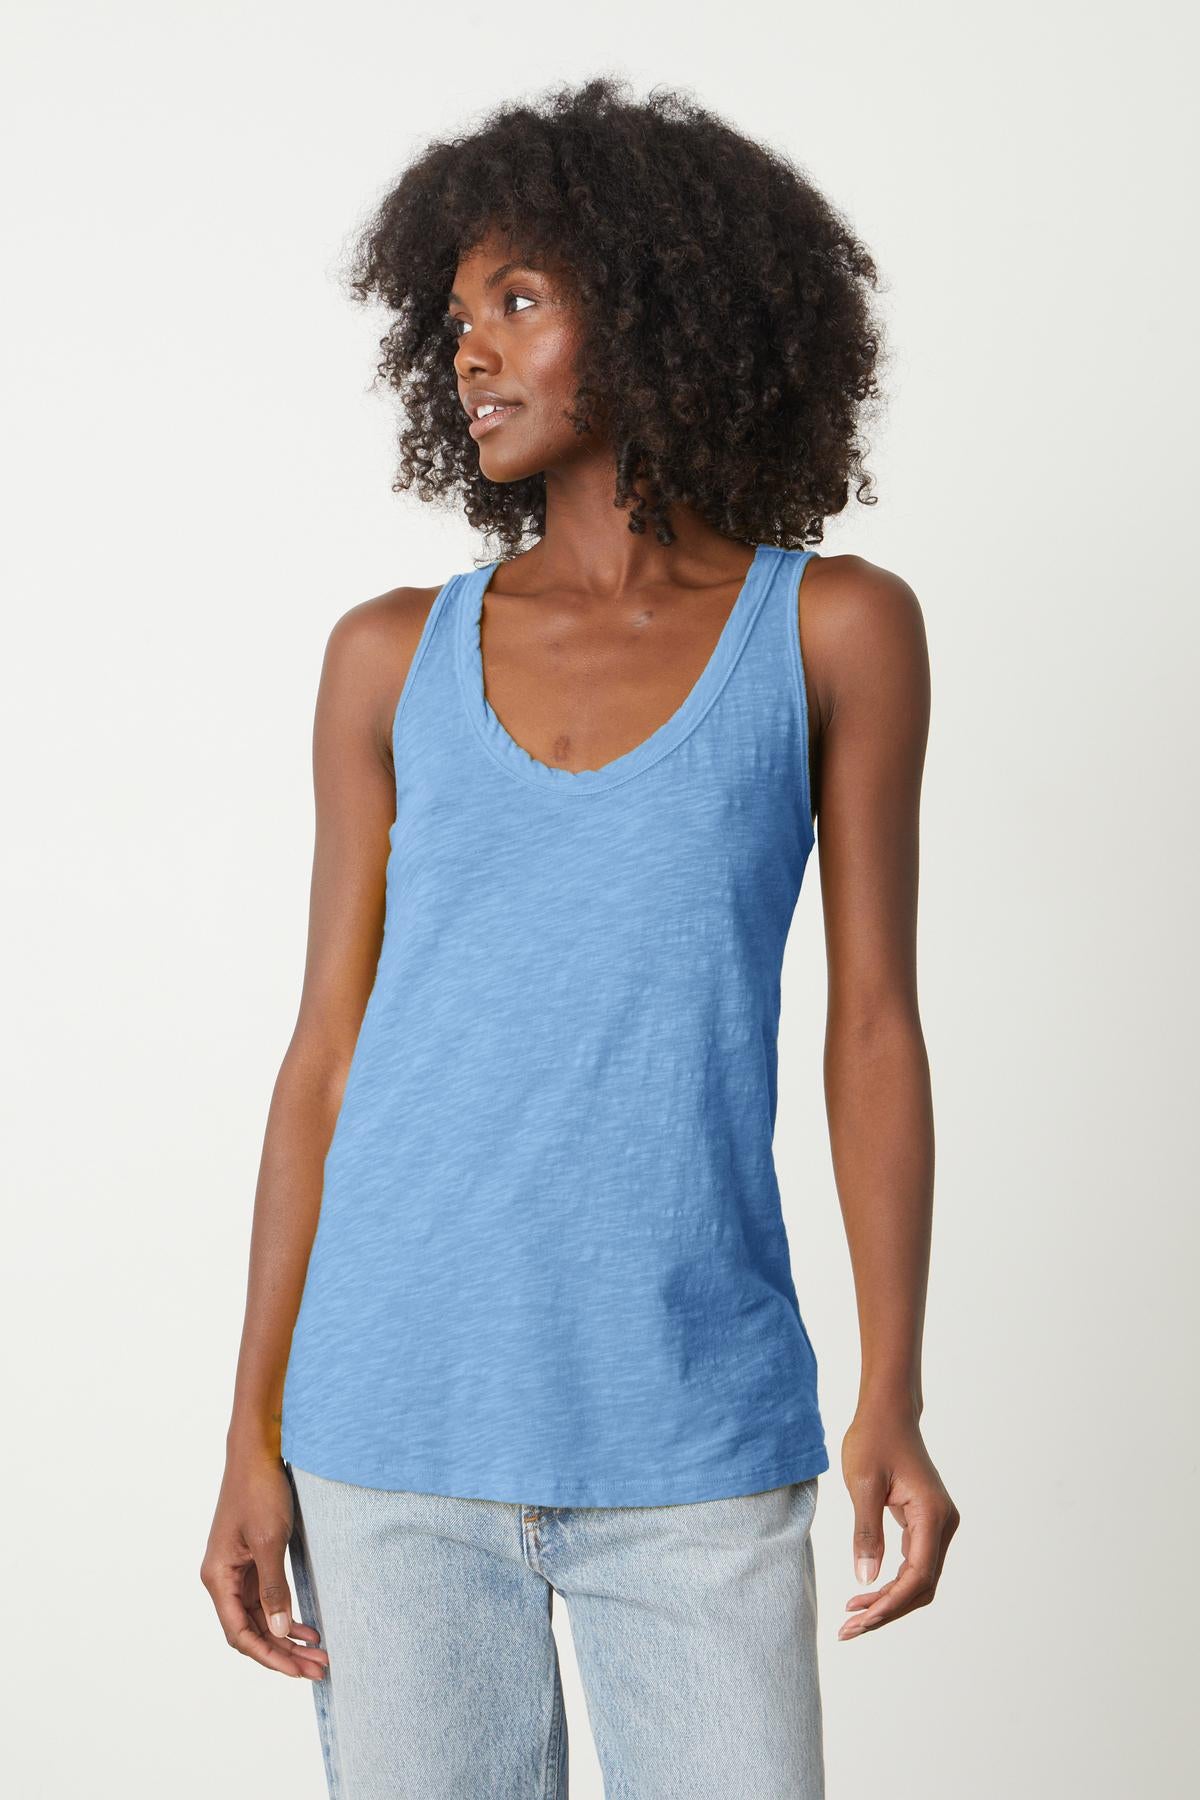 A woman wearing a Velvet by Graham & Spencer JOY ORIGINAL SLUB SCOOP NECK TANK in blue, with a soft cotton fabric and flattering arm hole.-35201175650497